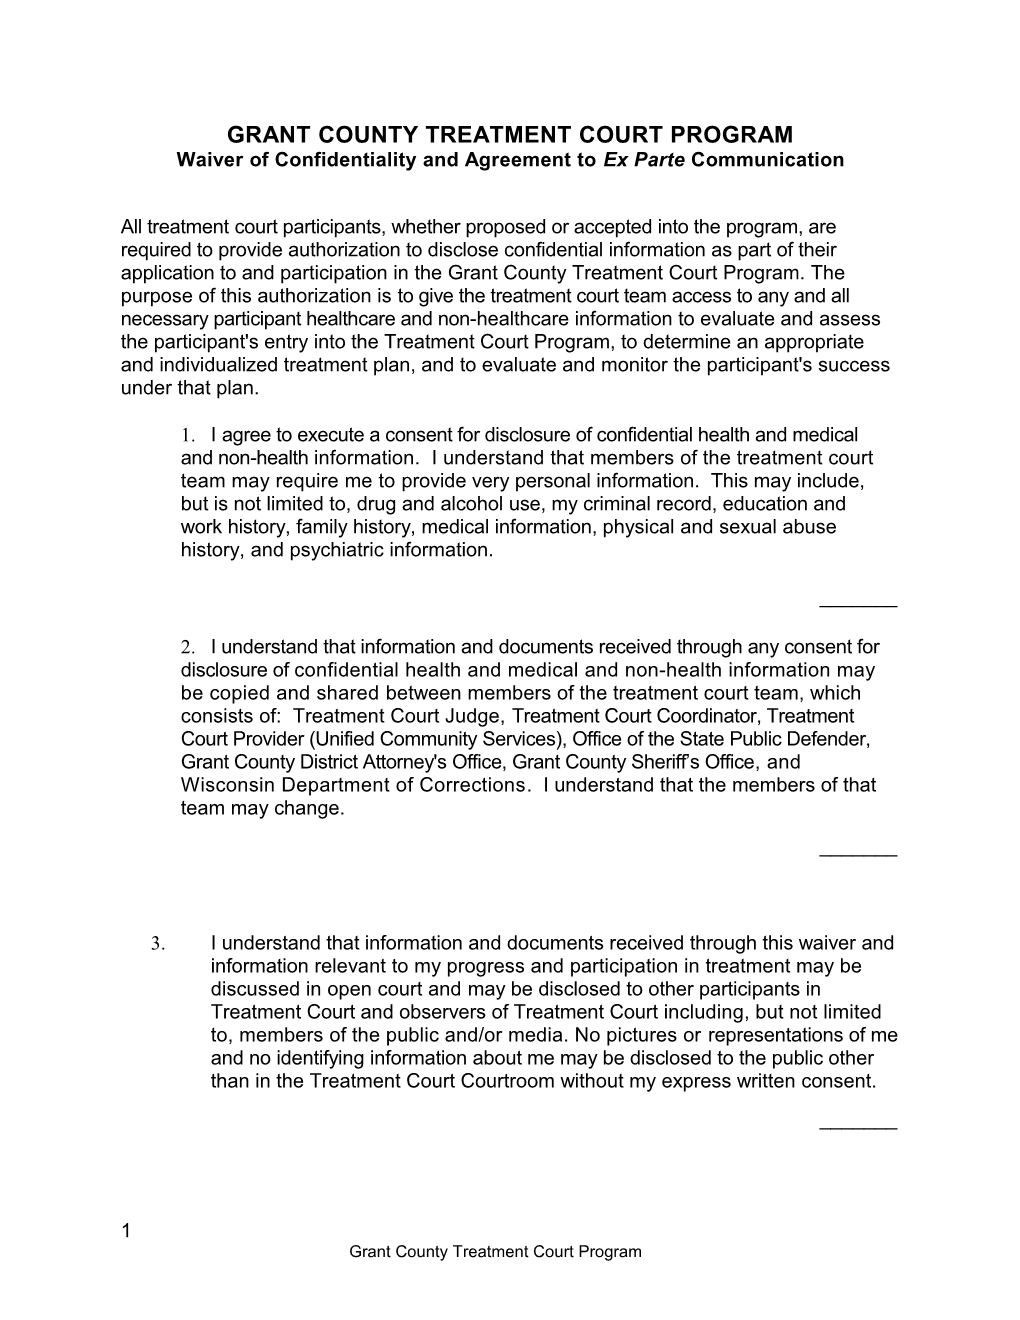 GRANT COUNTY TREATMENT COURT PROGRAM Waiver of Confidentiality and Agreement to Ex Parte